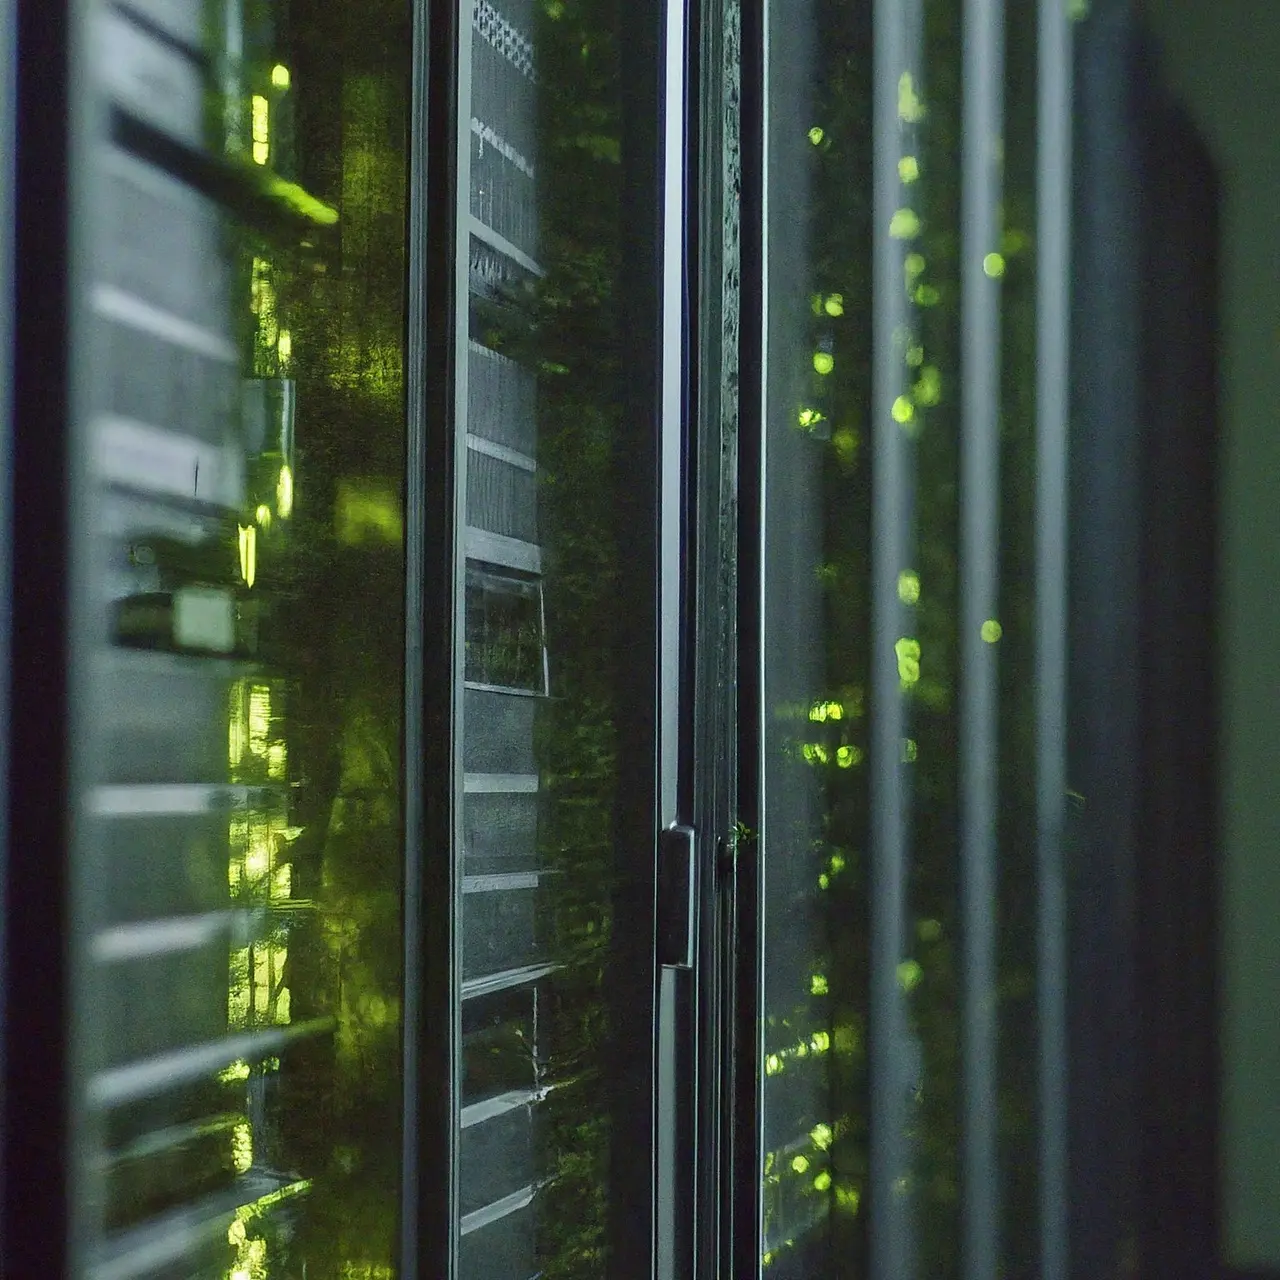 Server racks with glowing lights in a dark data center. 35mm stock photo